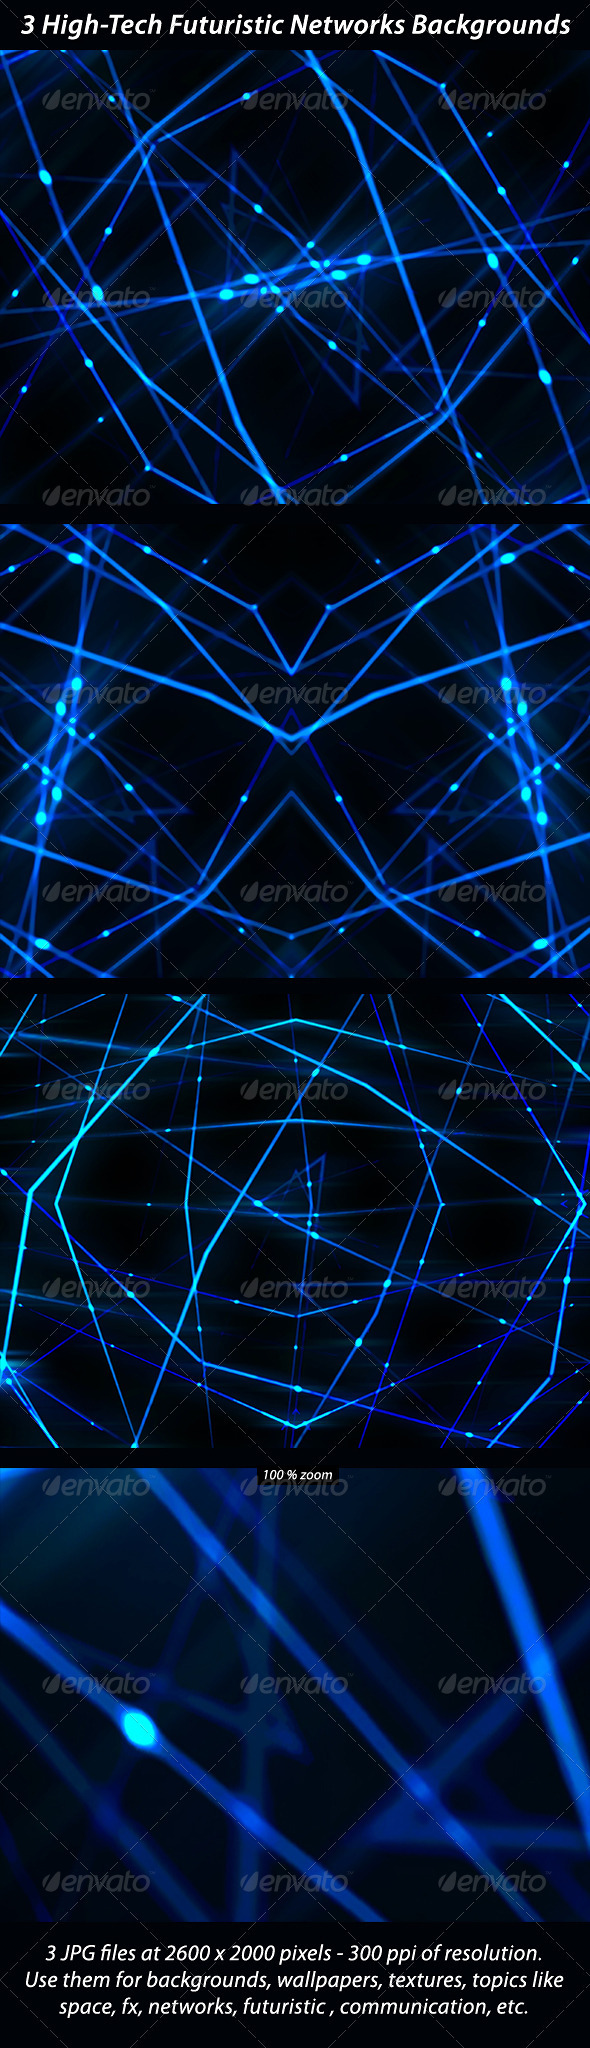 3 High Tech Futuristic Networks Backgrounds by Rudimencial | GraphicRiver